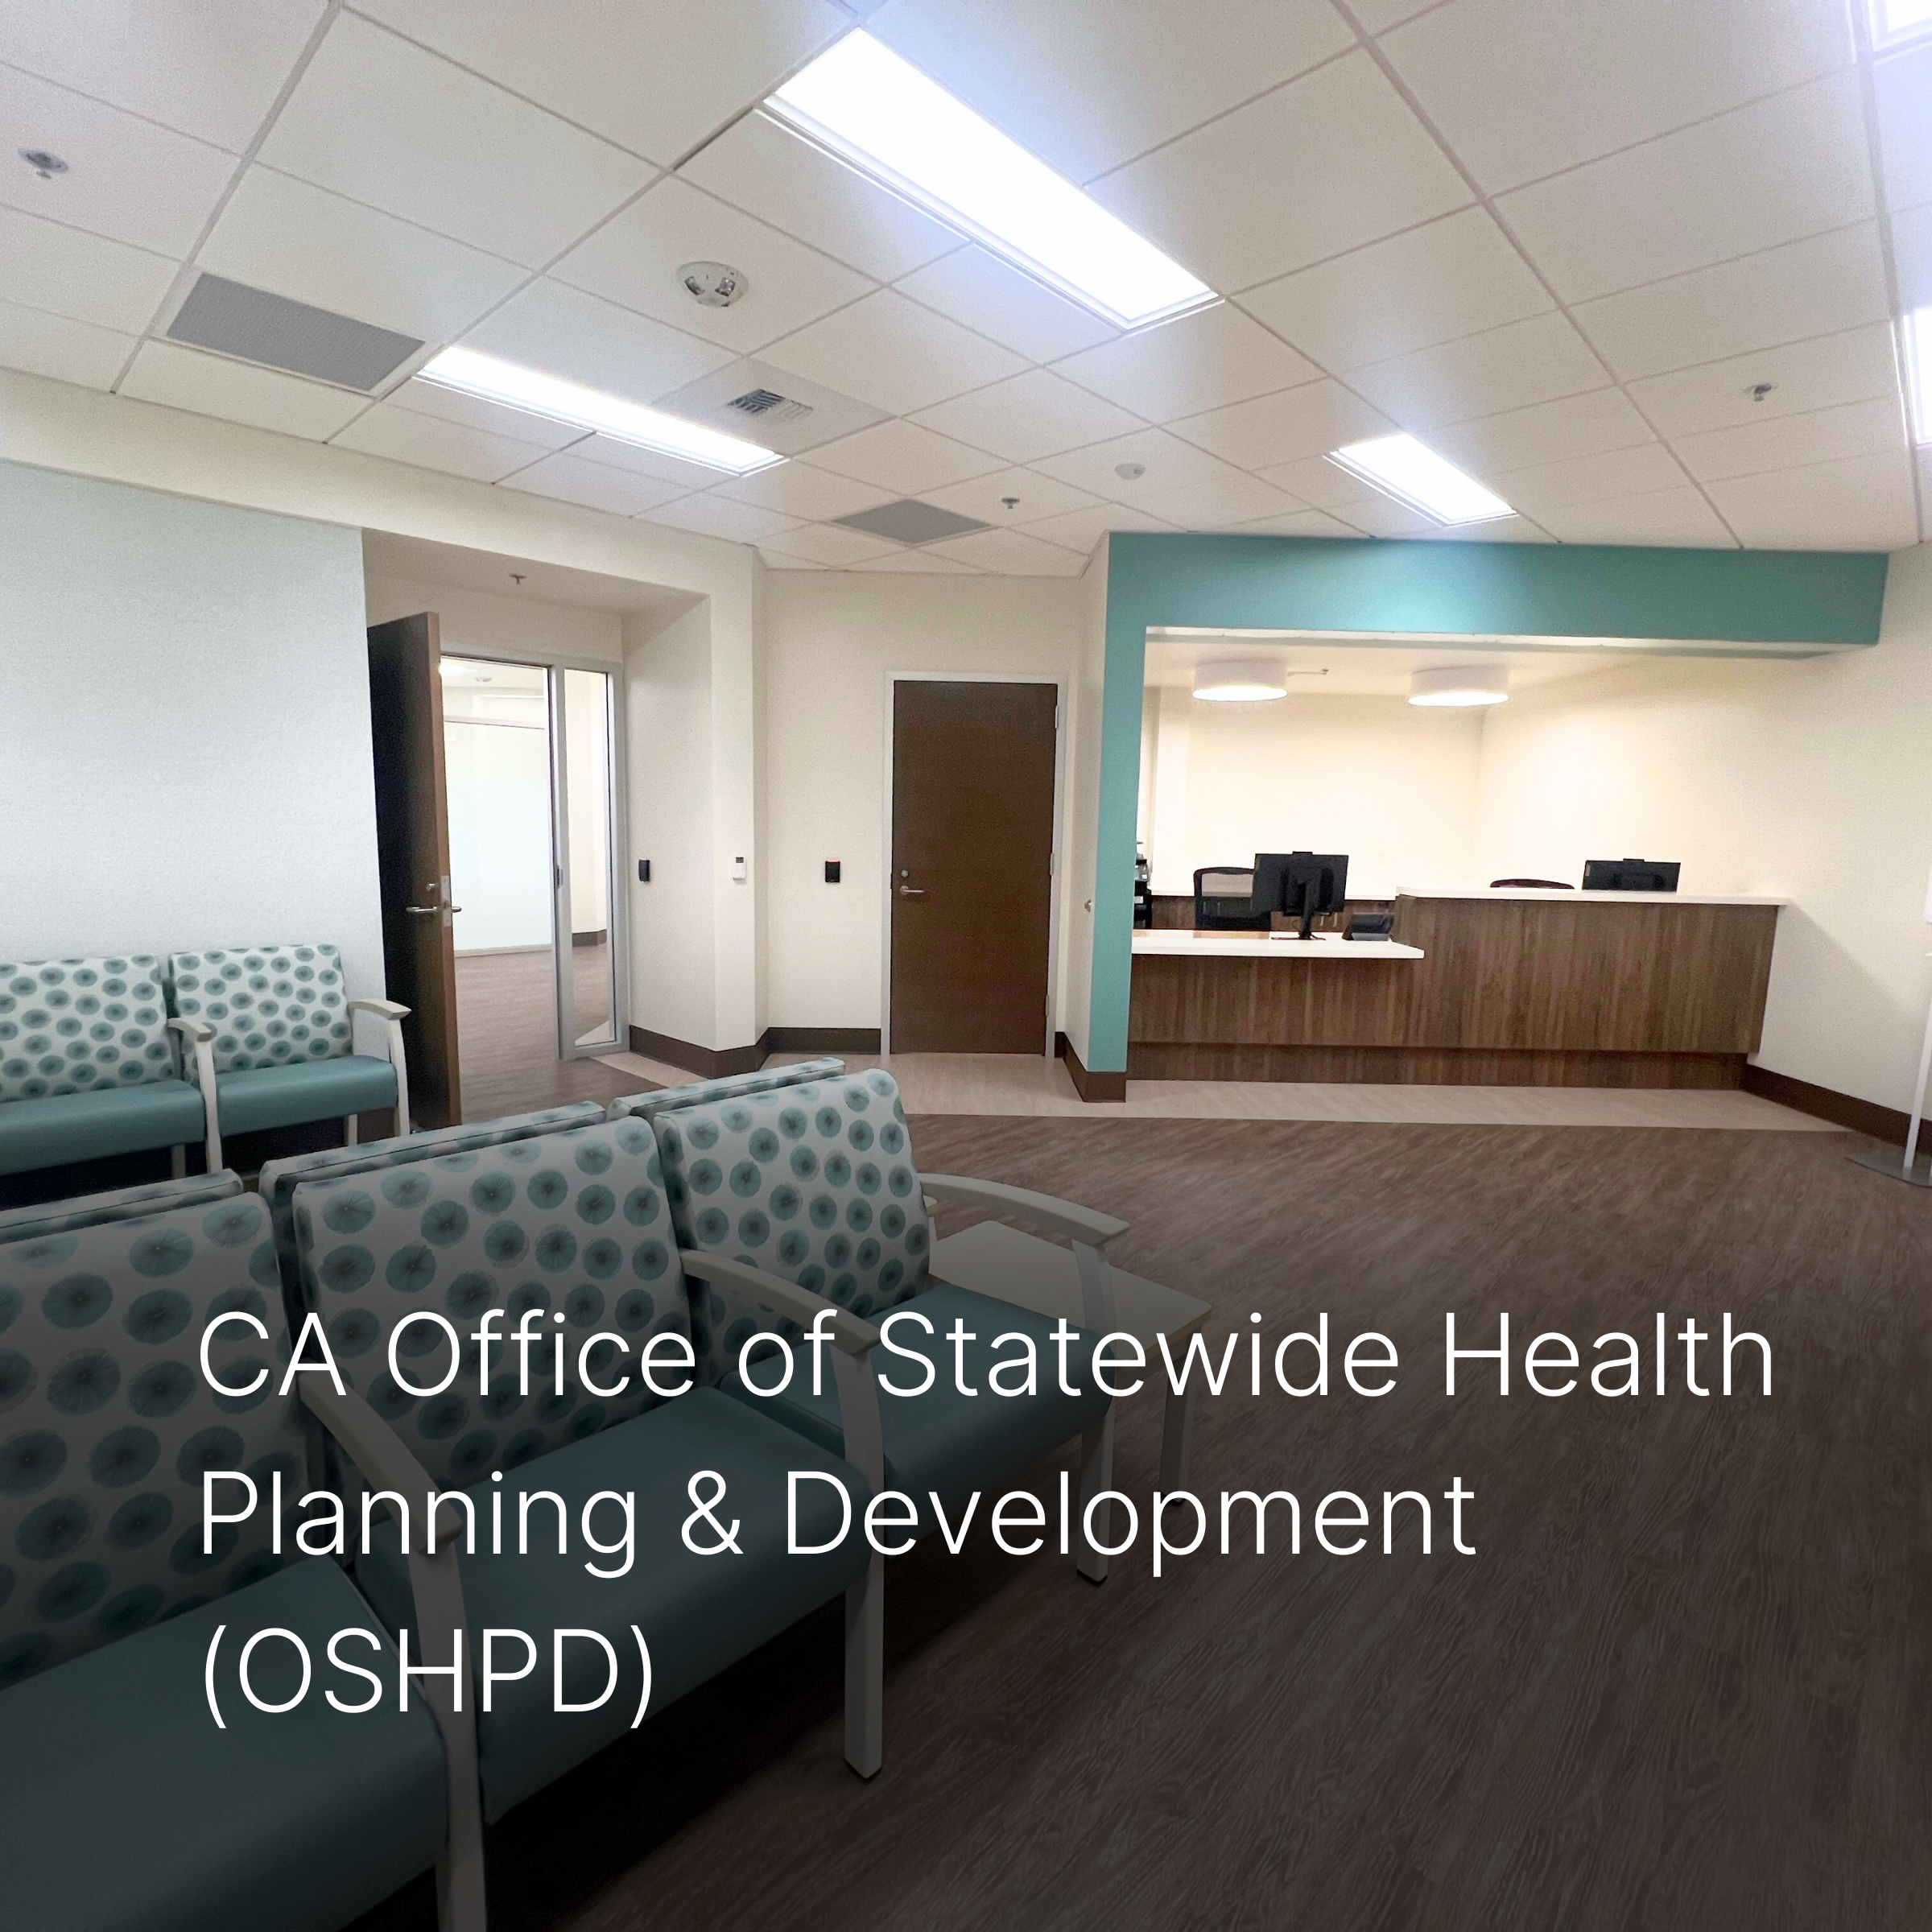 Healthcare waiting room with caption of CA Office of Statewide Health Planning and Development (OSHPD).